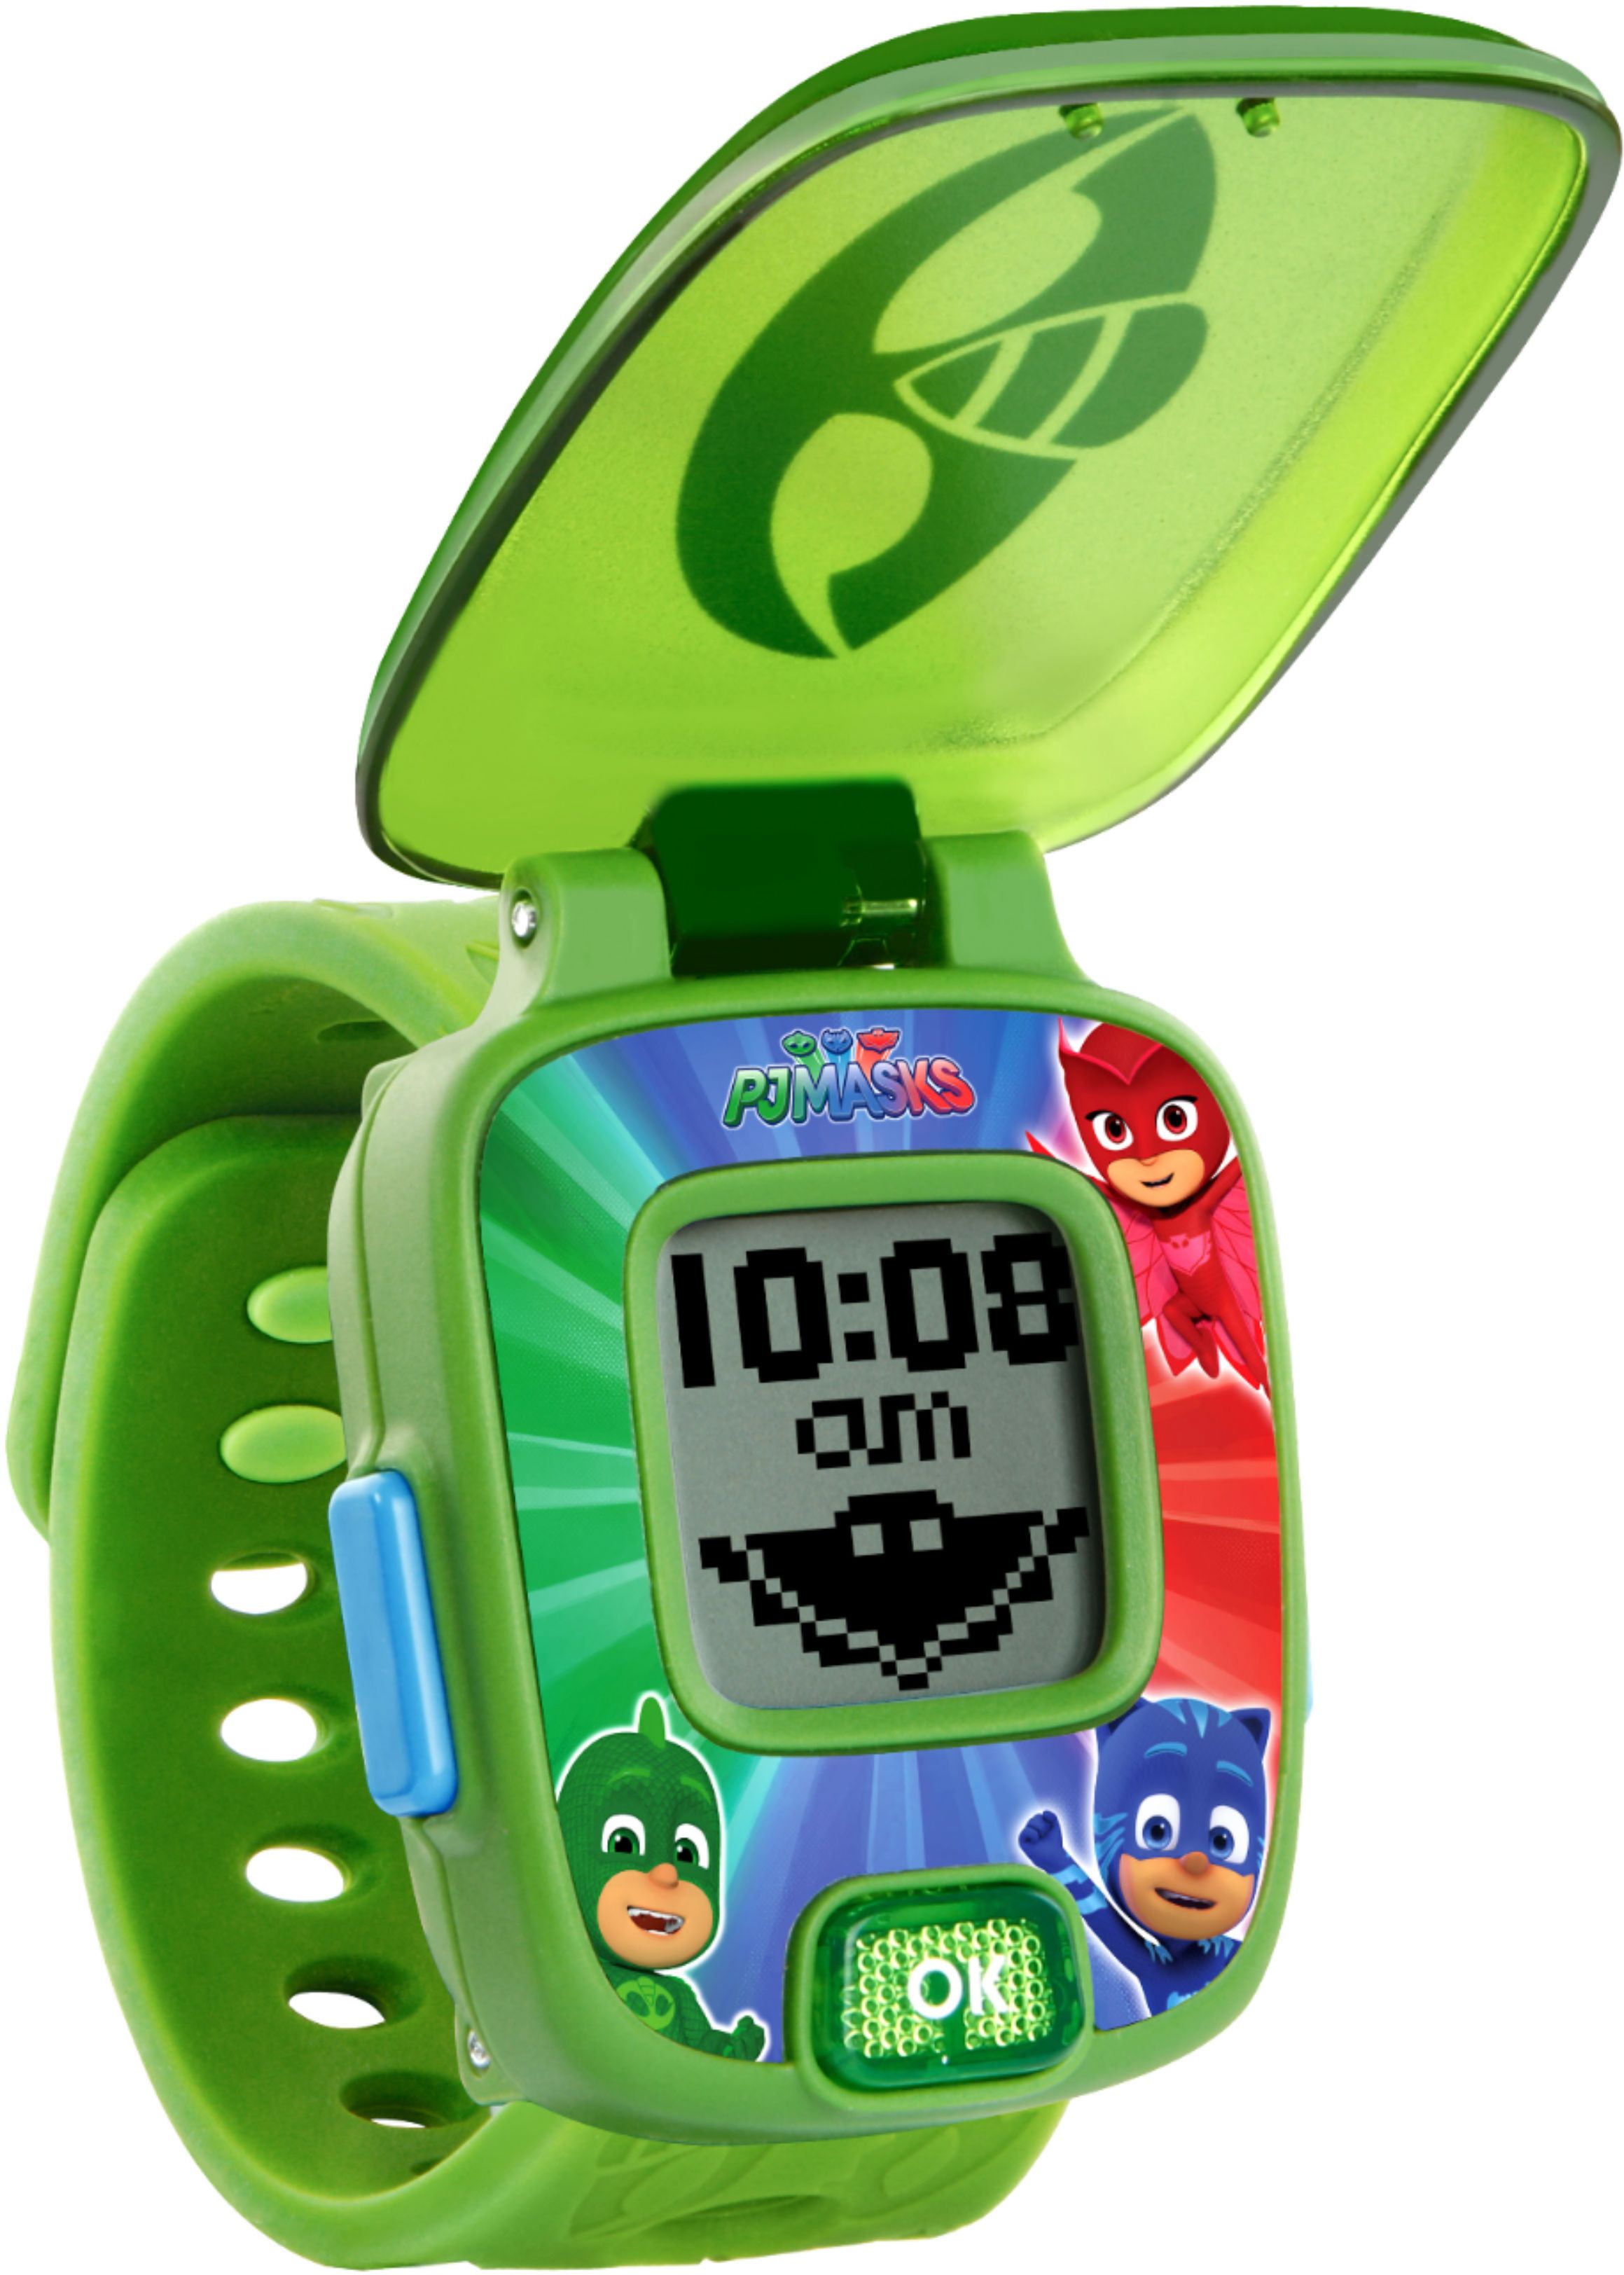 Angle View: Nickelodeon Paw Patrol Character Walkie Talkies for Kids With Extended Range and Static Free Adventures.